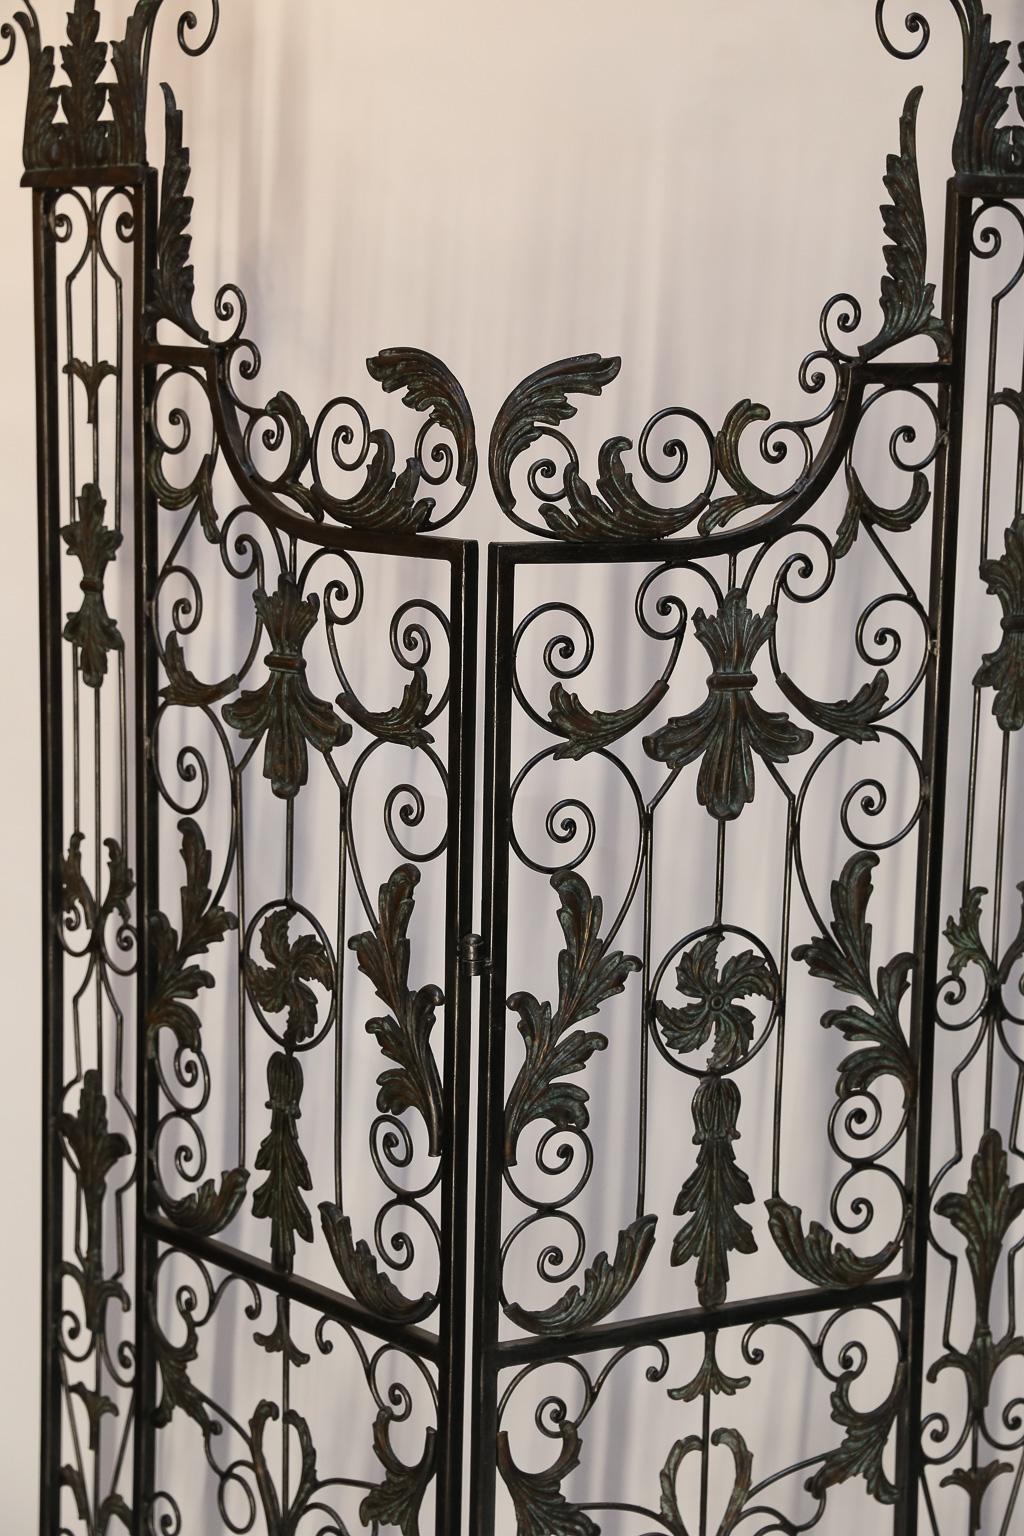 Pair of vintage wrought iron Filigree Gates decorated with acanthus leaves and fleur de lis in the various patterns.